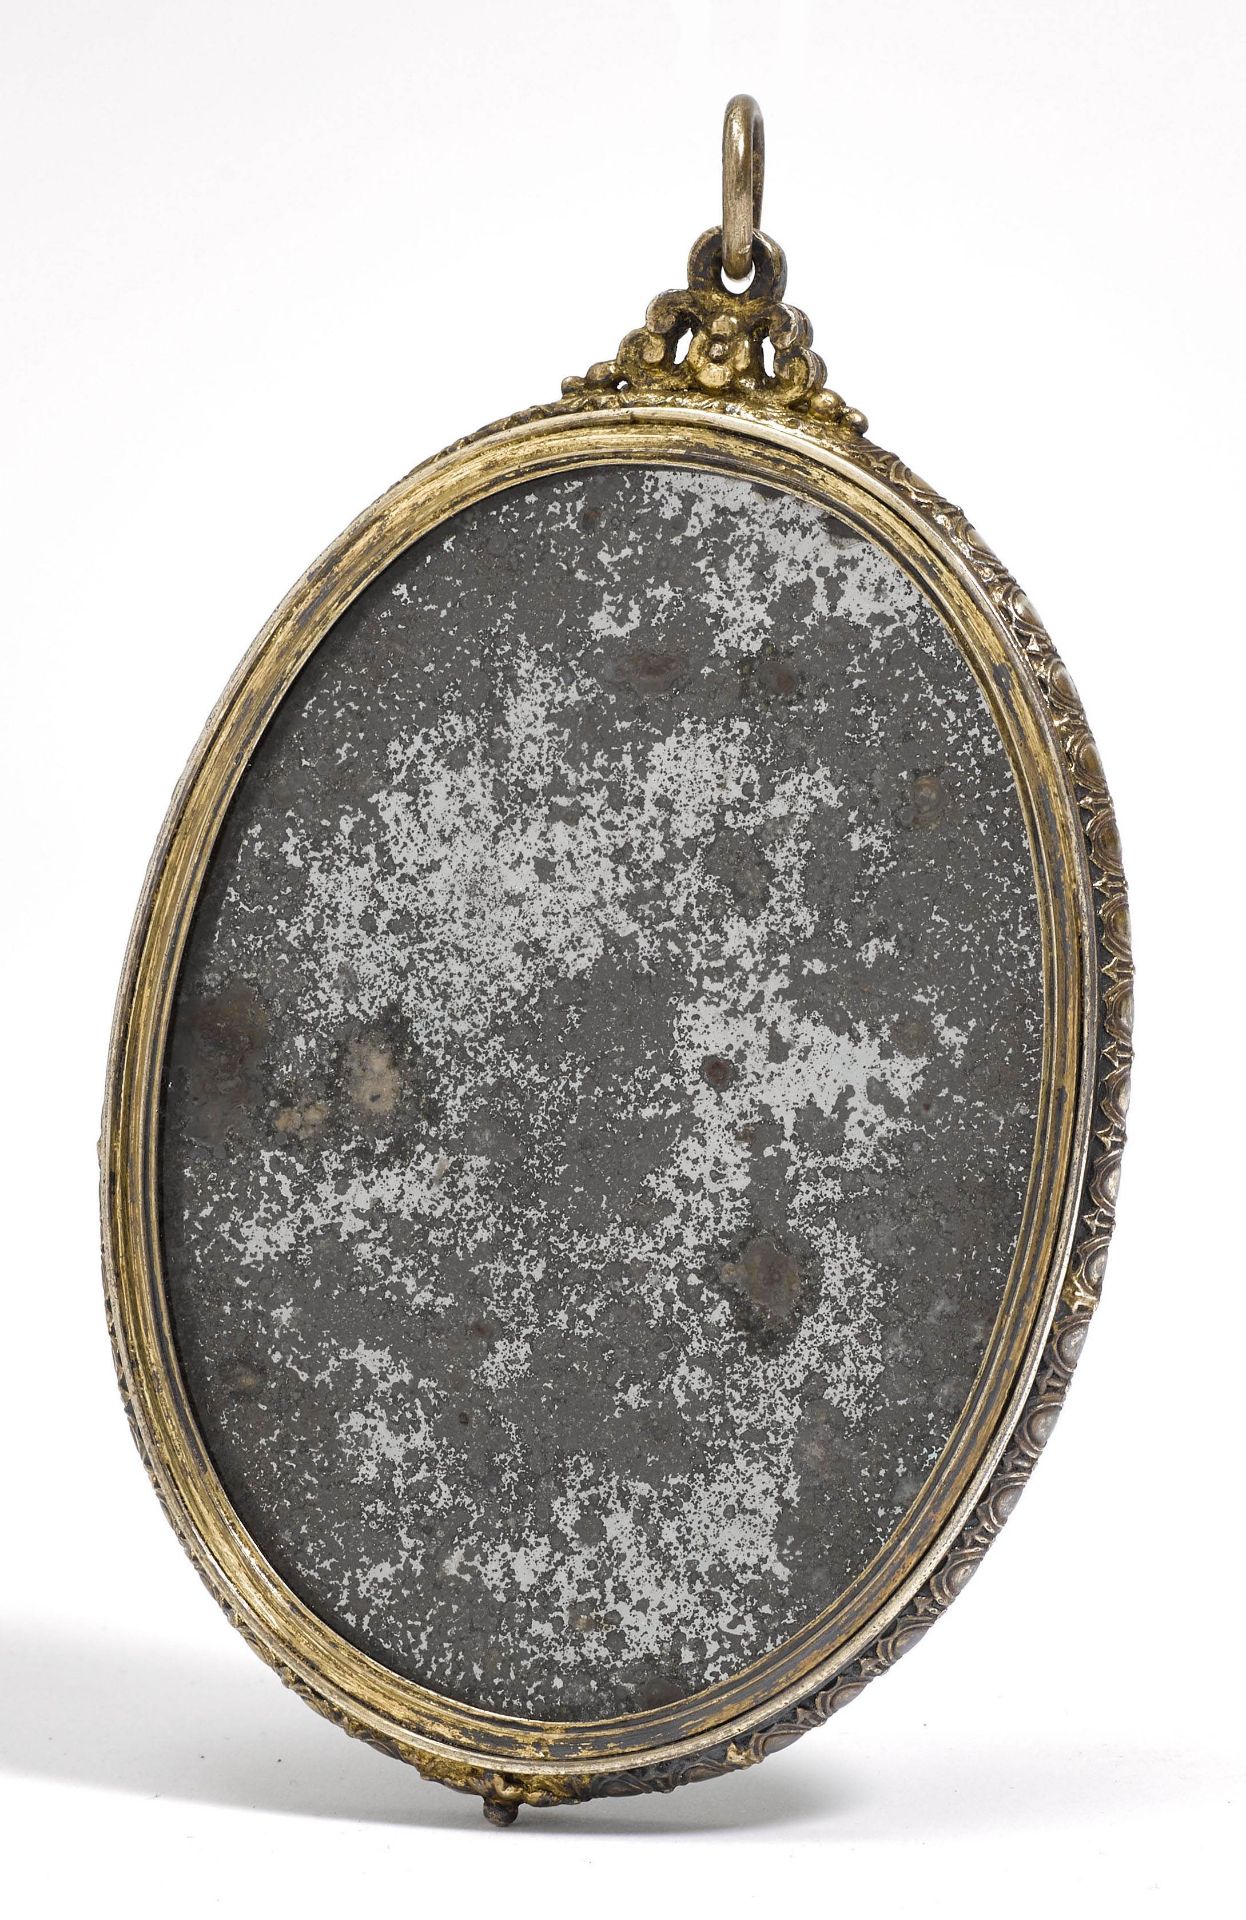 MIRROR MEDALLION WITH LIMOGES ENAMEL PAINTWORK - Image 2 of 3